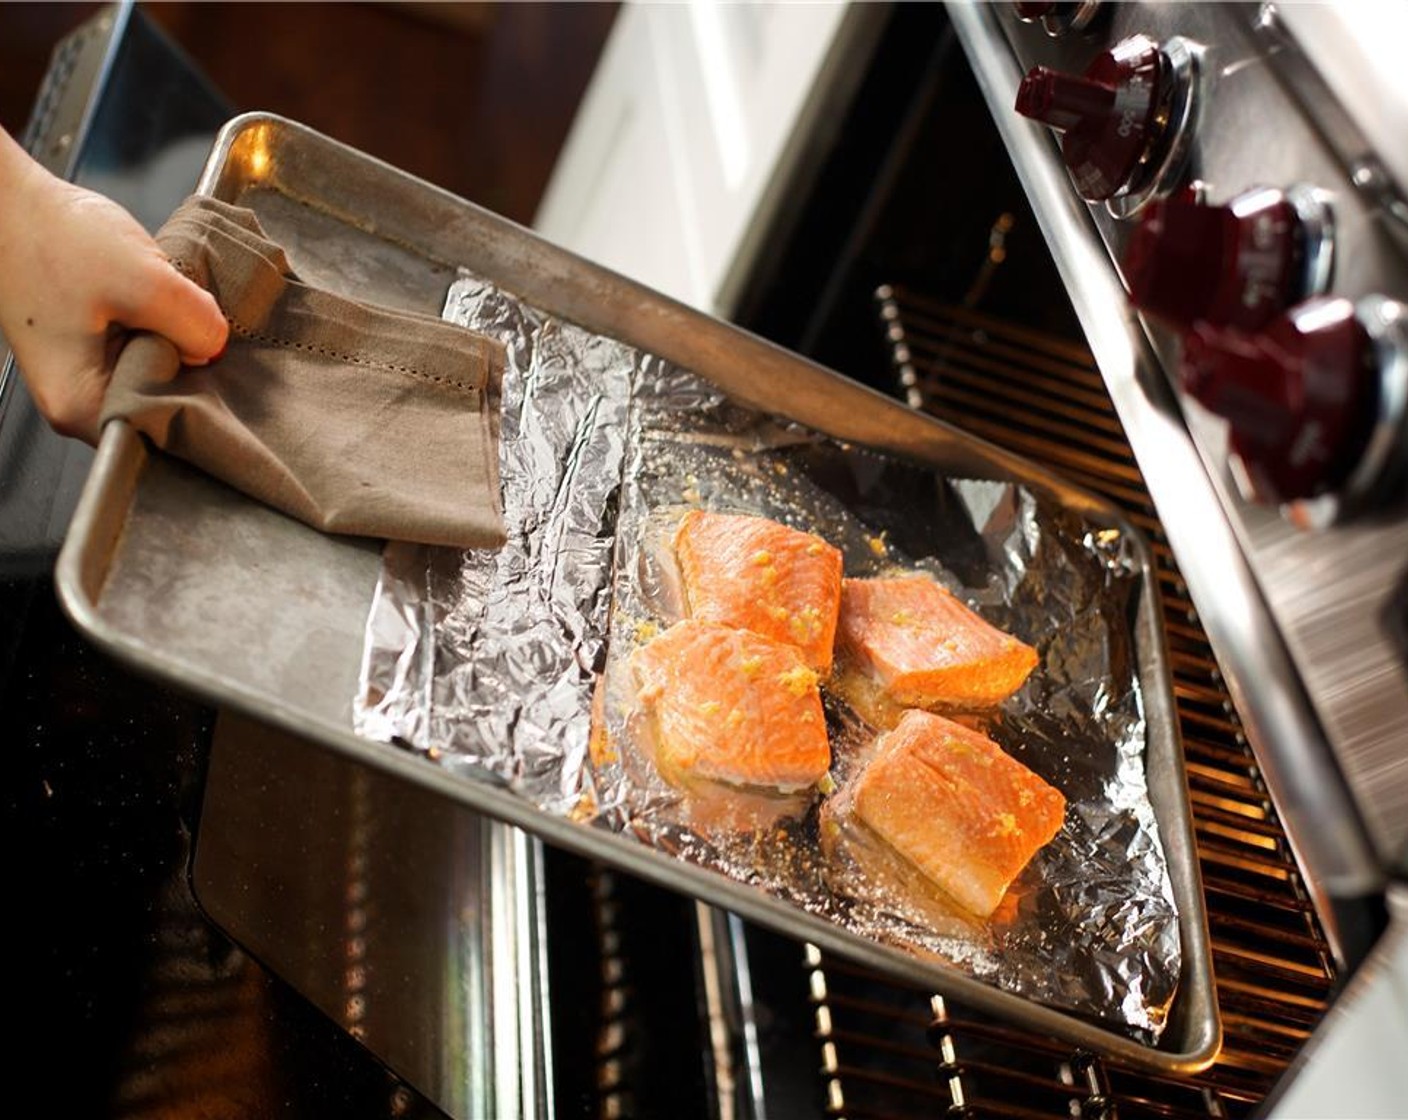 step 13 Pat the Trout Fillets (2) dry with paper towels and cut the fillets in half across. Place the fillets on the foil lined sheet pan and drizzle trout with Olive Oil (1/2 tsp). Season with Salt (1/2 tsp) and the lemon zest. Place in the oven and roast for nine minutes.